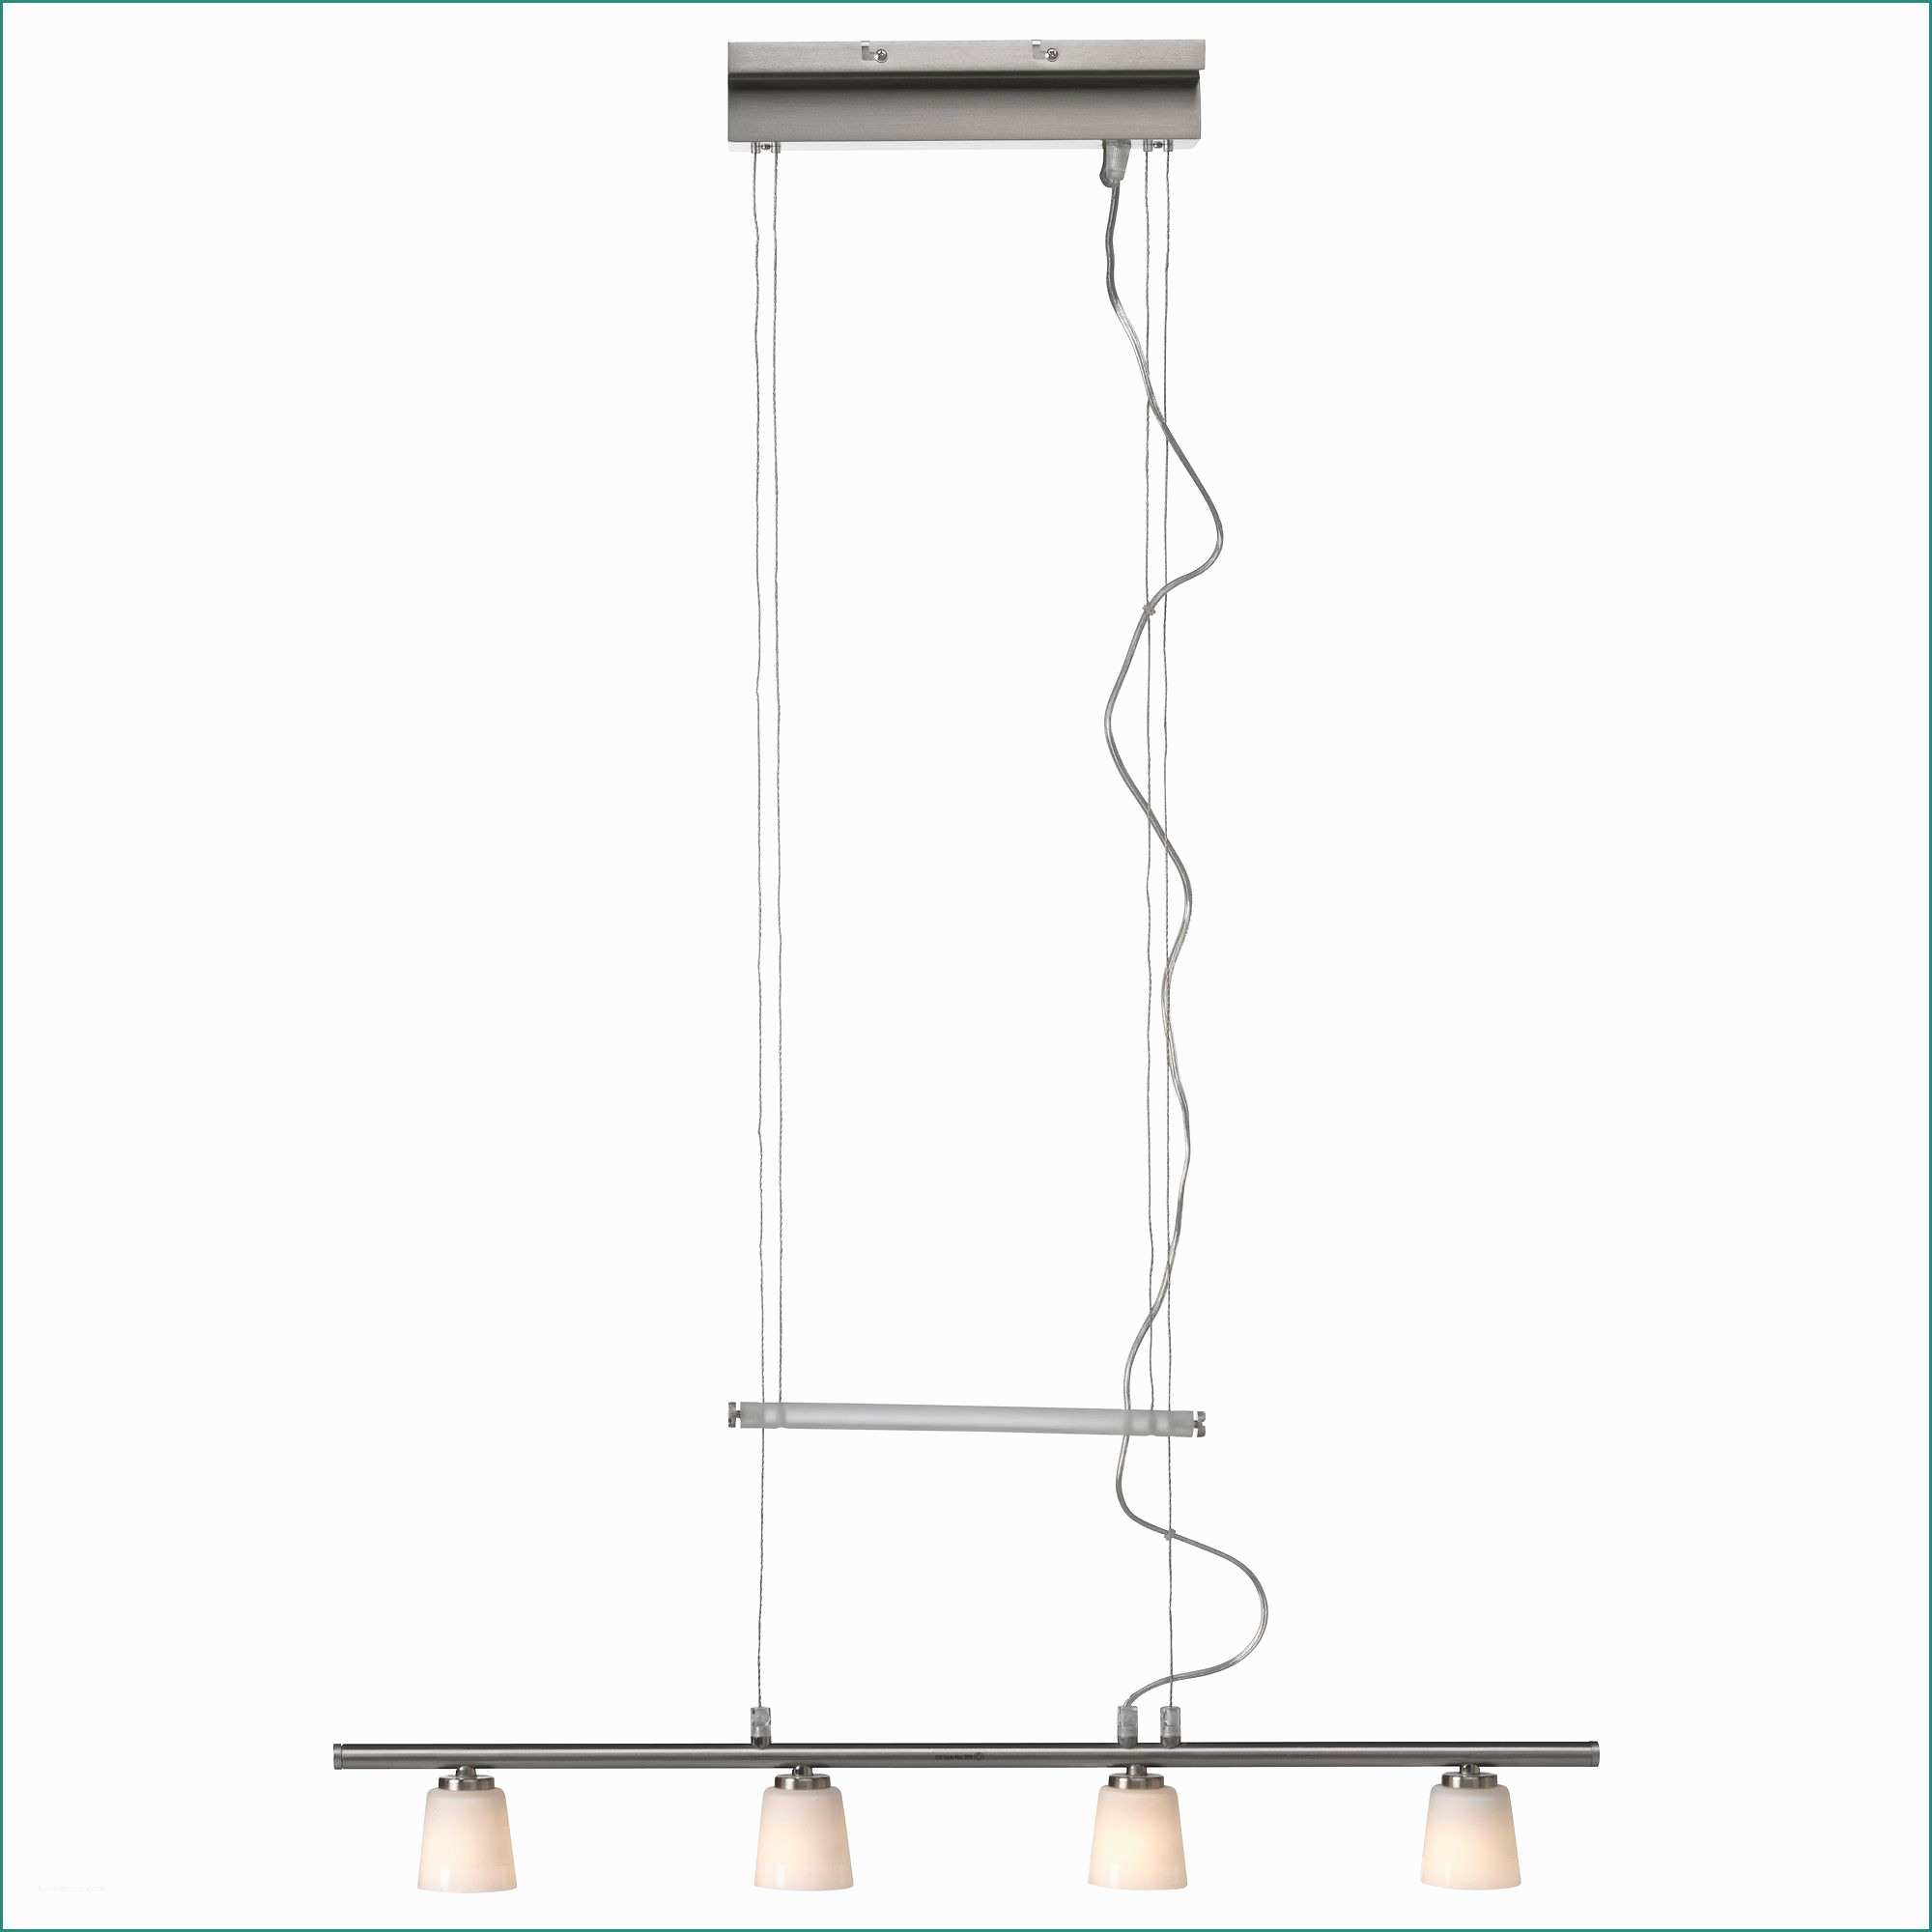 Lampade Comodino Moderne E Tidig Pendent Lamp with 4 Lamps Ikea My Ikea Playbook